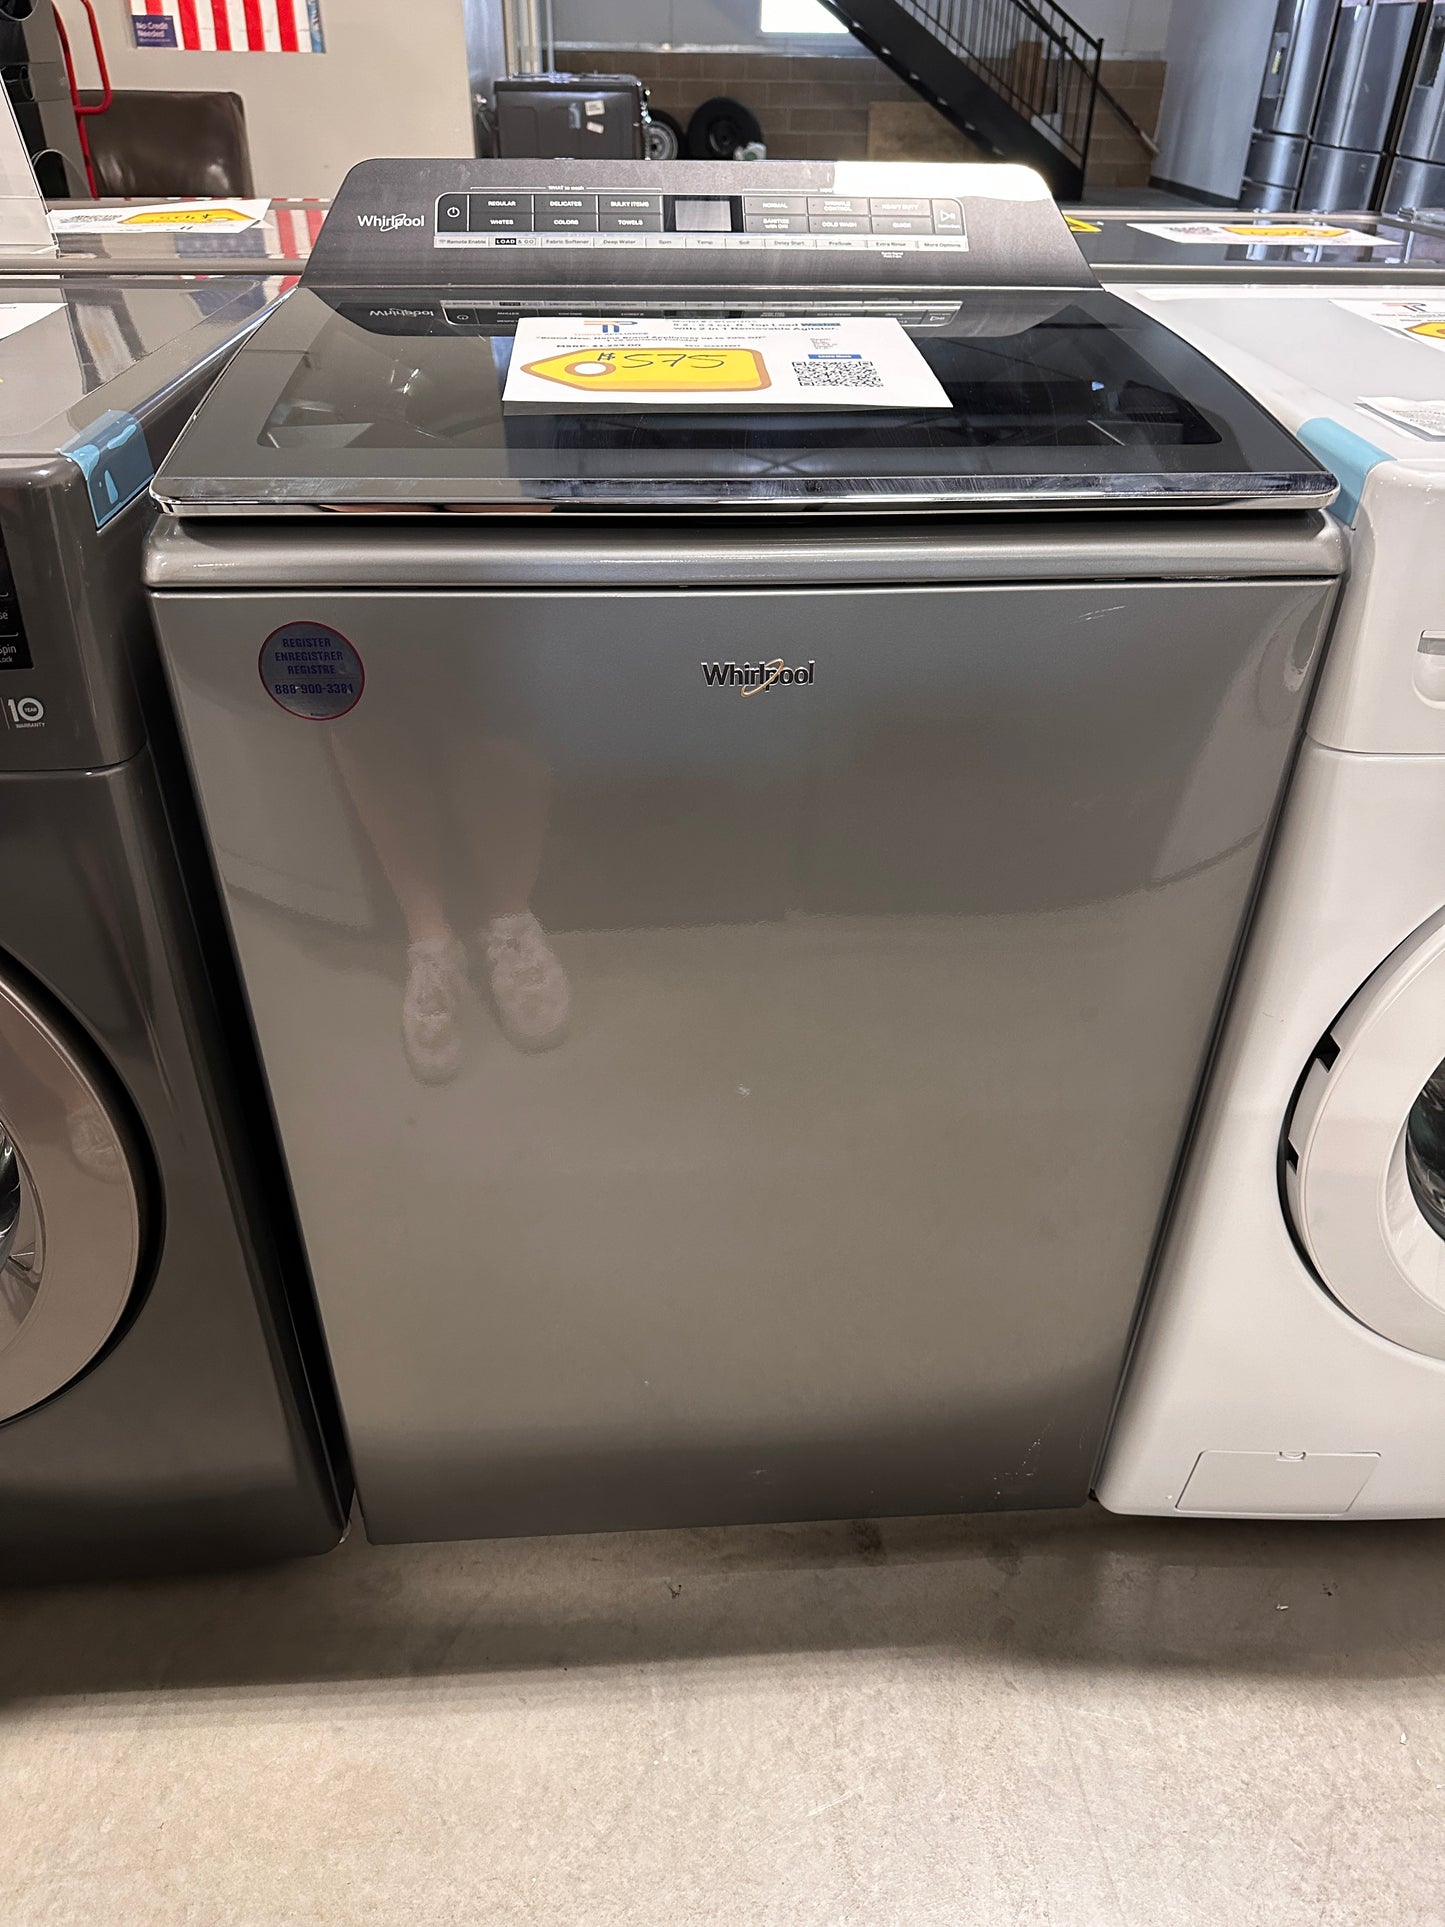 NEW WHIRLPOOL TOP LOAD WASHER WITH REMOVABLE AGITATOR MODEL: WTW8127LC  WAS13207